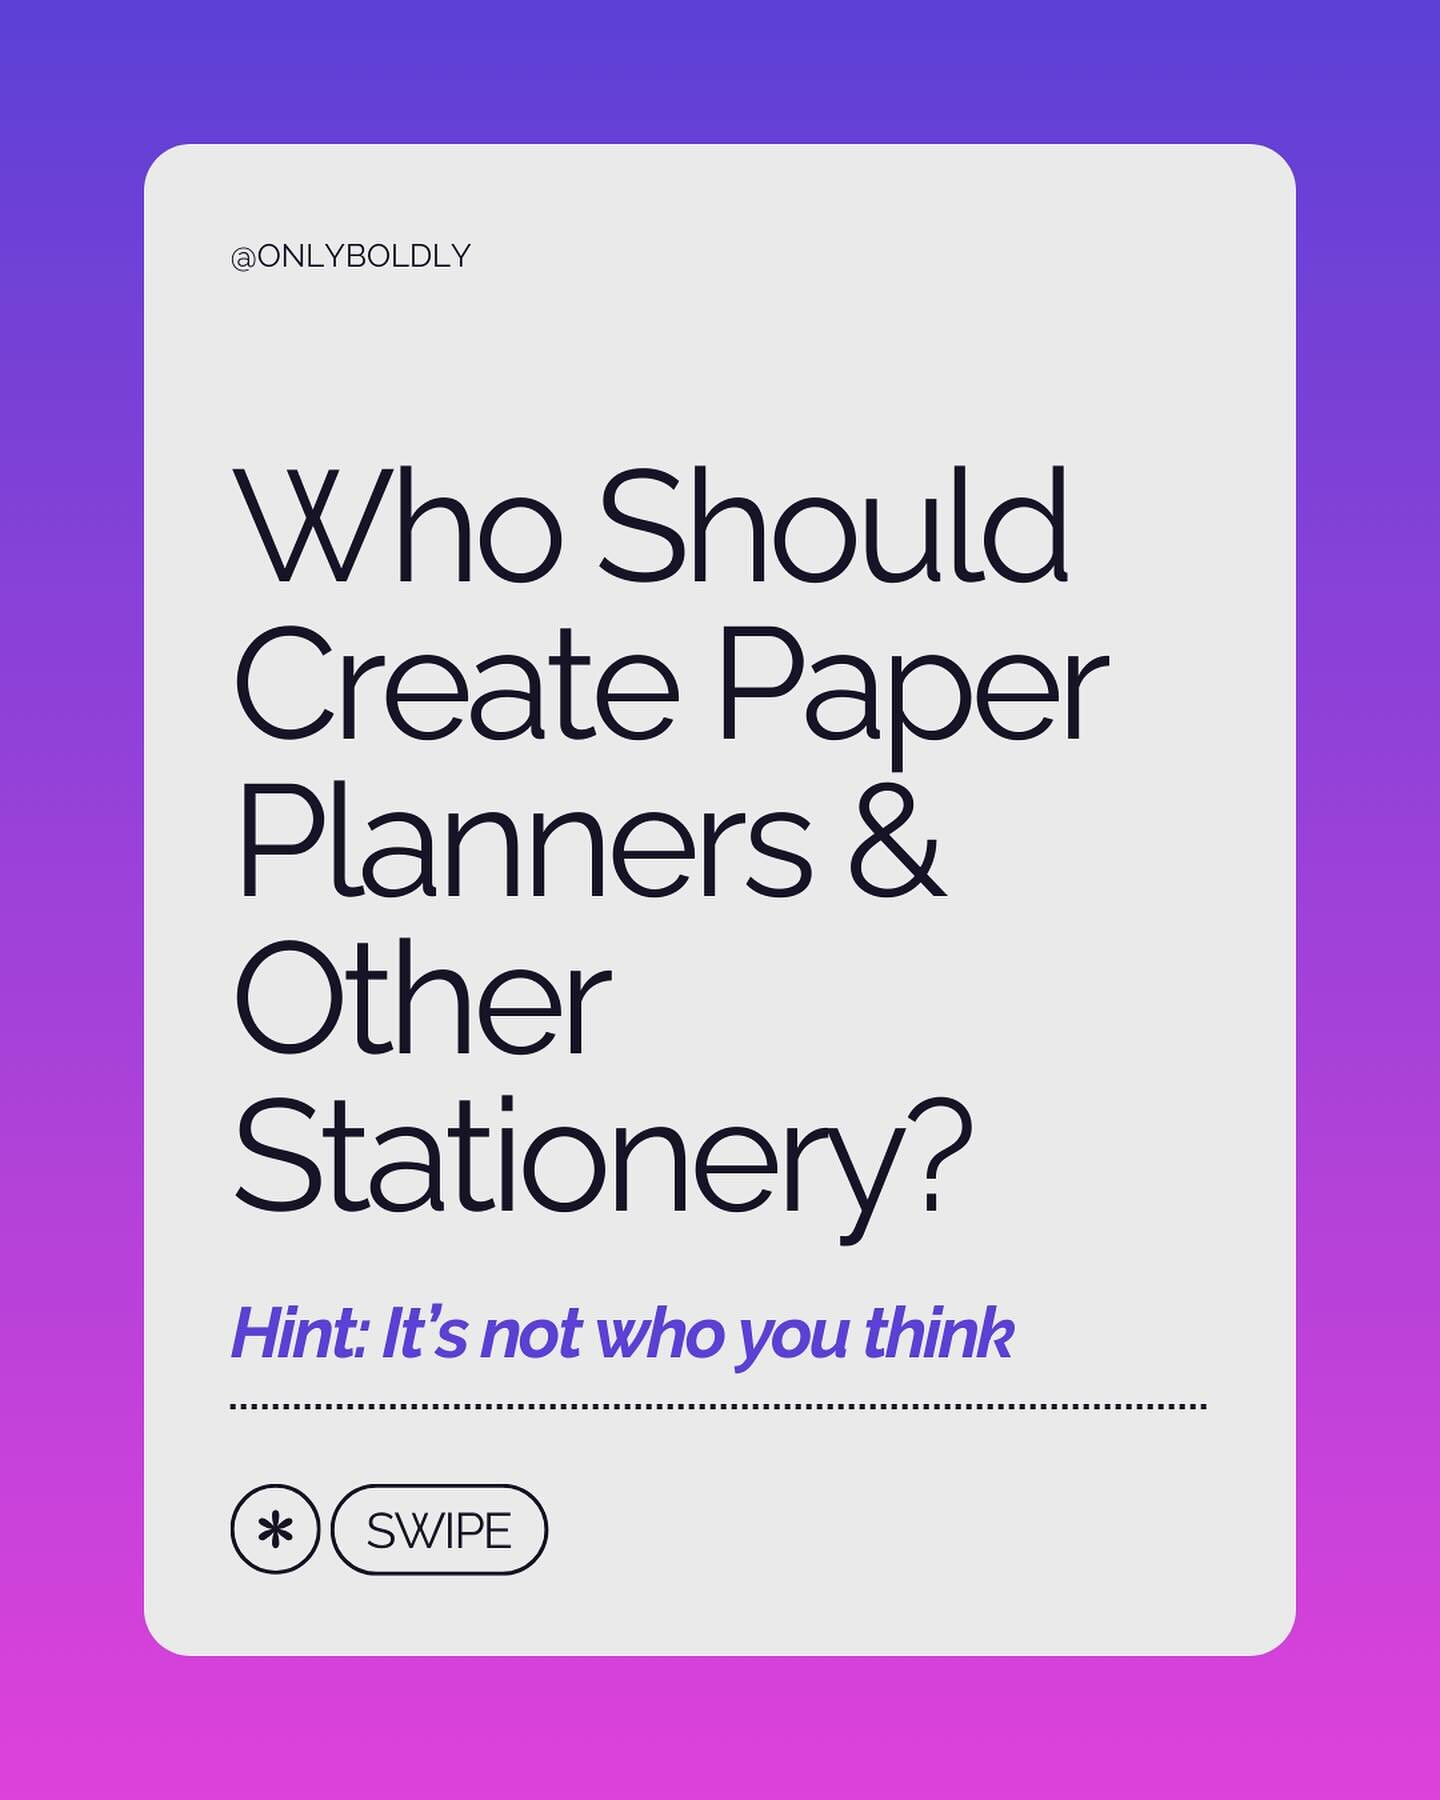 Think creating a paper planner and stationery won&rsquo;t work for your type of business?

Think again.

Swipe through for ideas on different businesses and niches that can add paper goods to their existing  business and offers.

You don&rsquo;t have